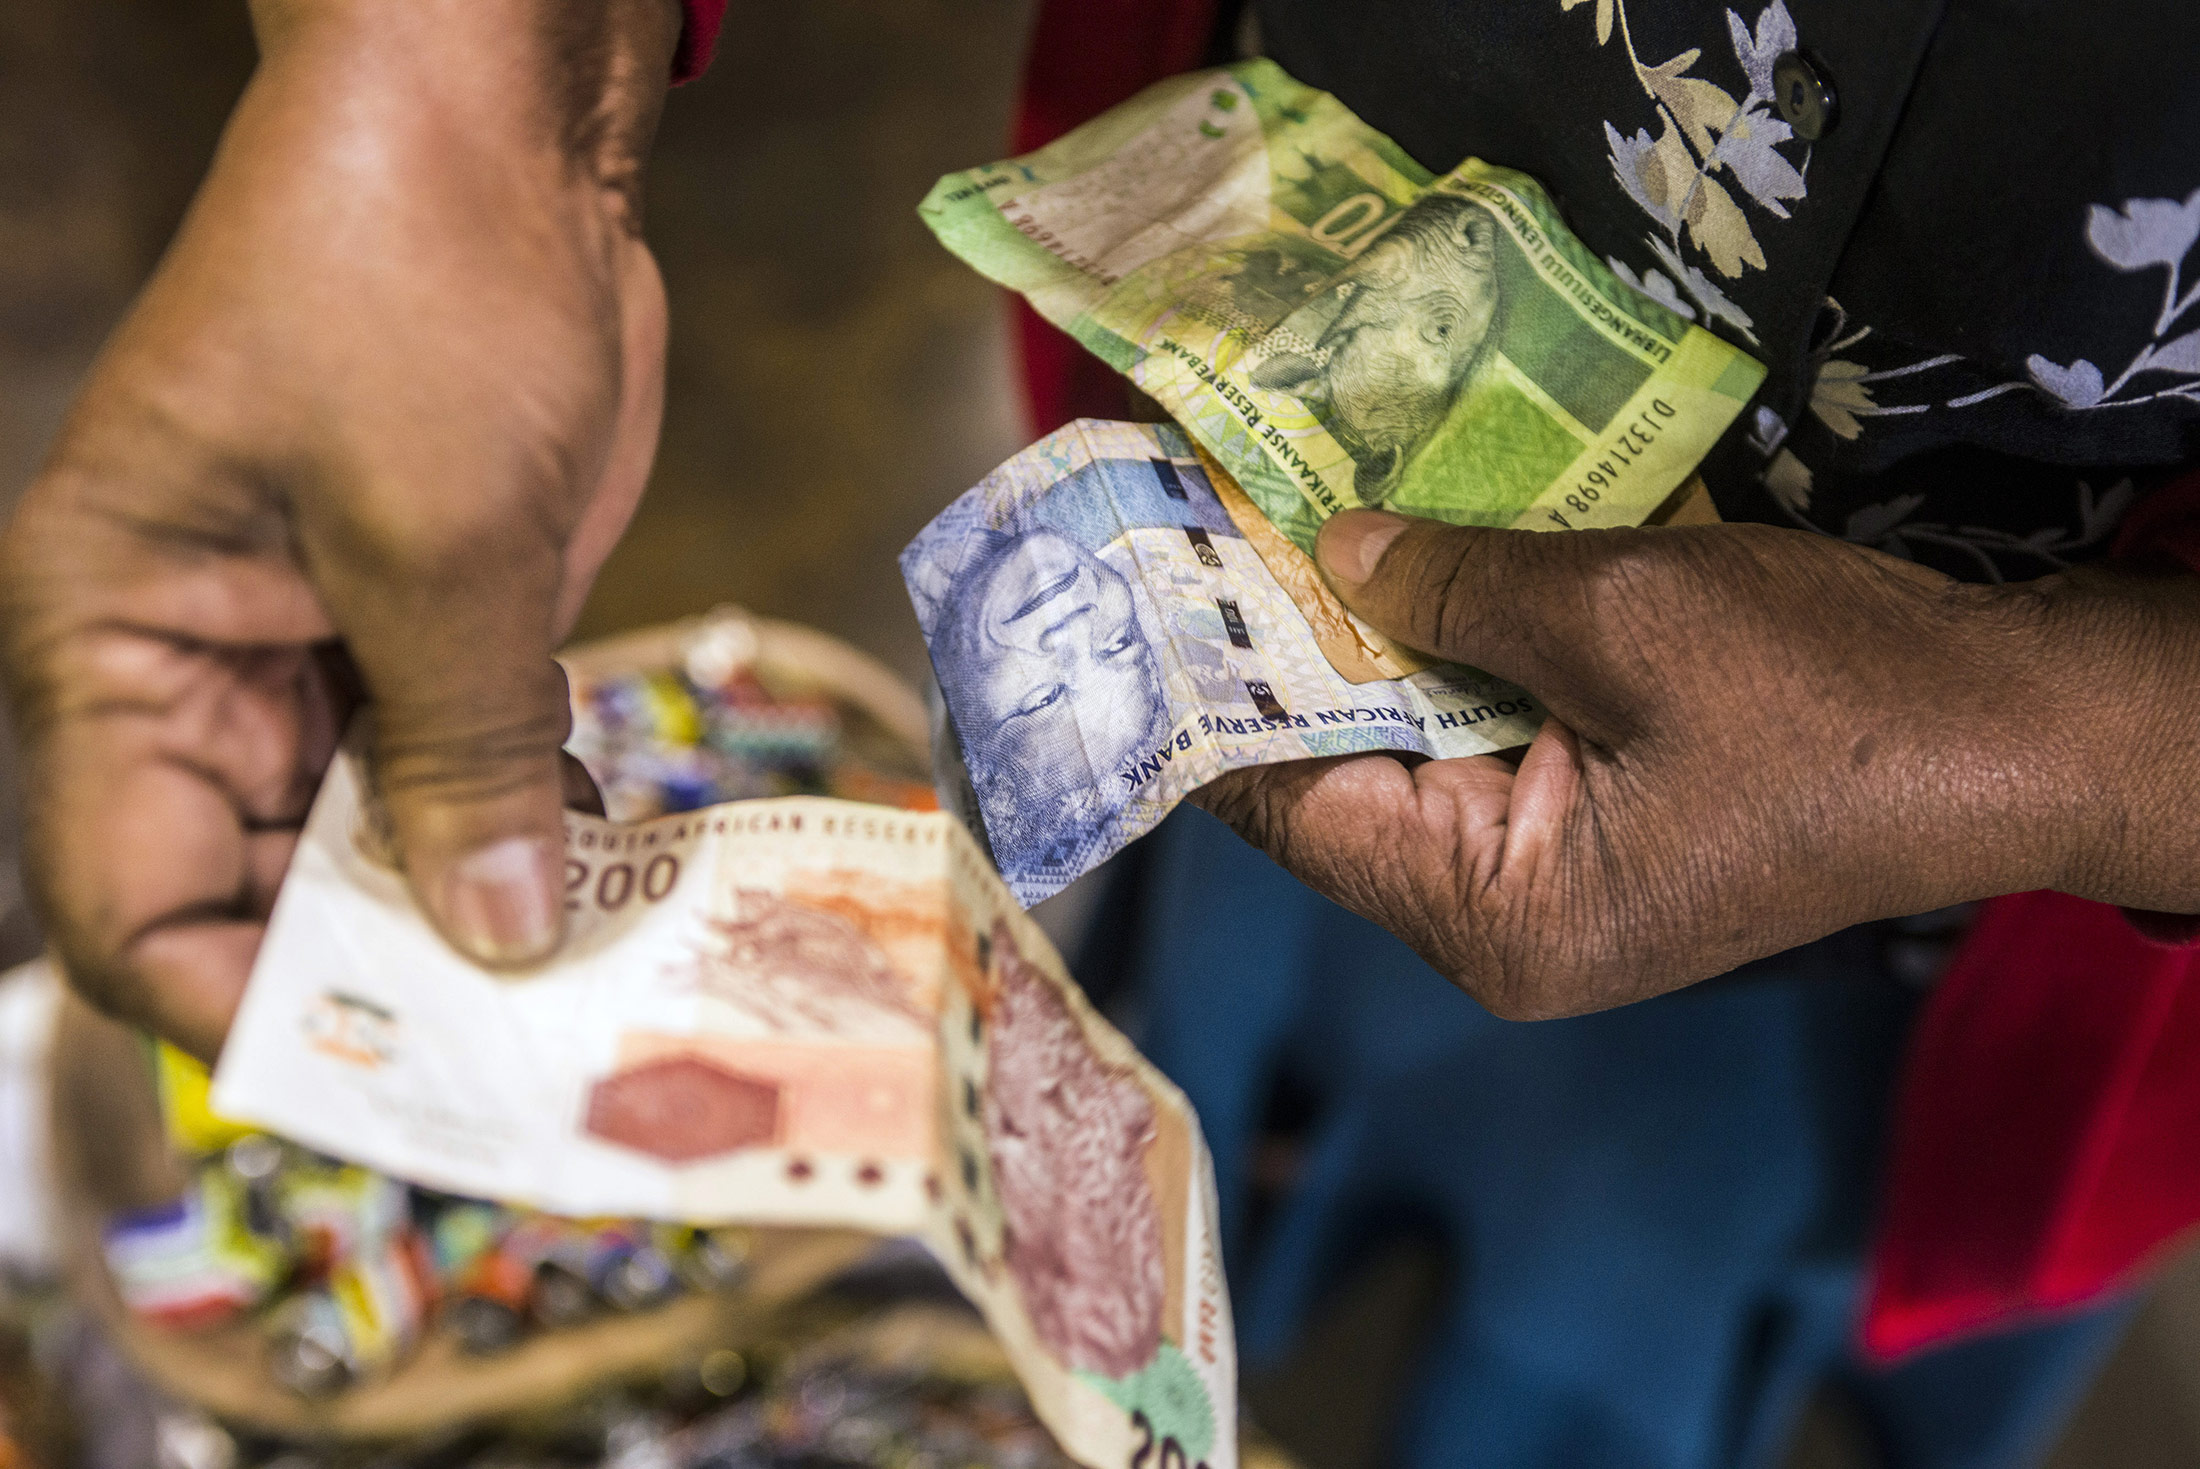 A vendor counts out rand banknotes while working in an African craft market in the Rosebank district of Johannesburg, South Africa, on Wednesday, Aug. 26, 2015. More than four years of currency declines -- to a fresh low this week -- aren't enough to offset electricity shortages, strikes and slowing demand from Asia and Europe that are pushing the economy to the brink of recession.
